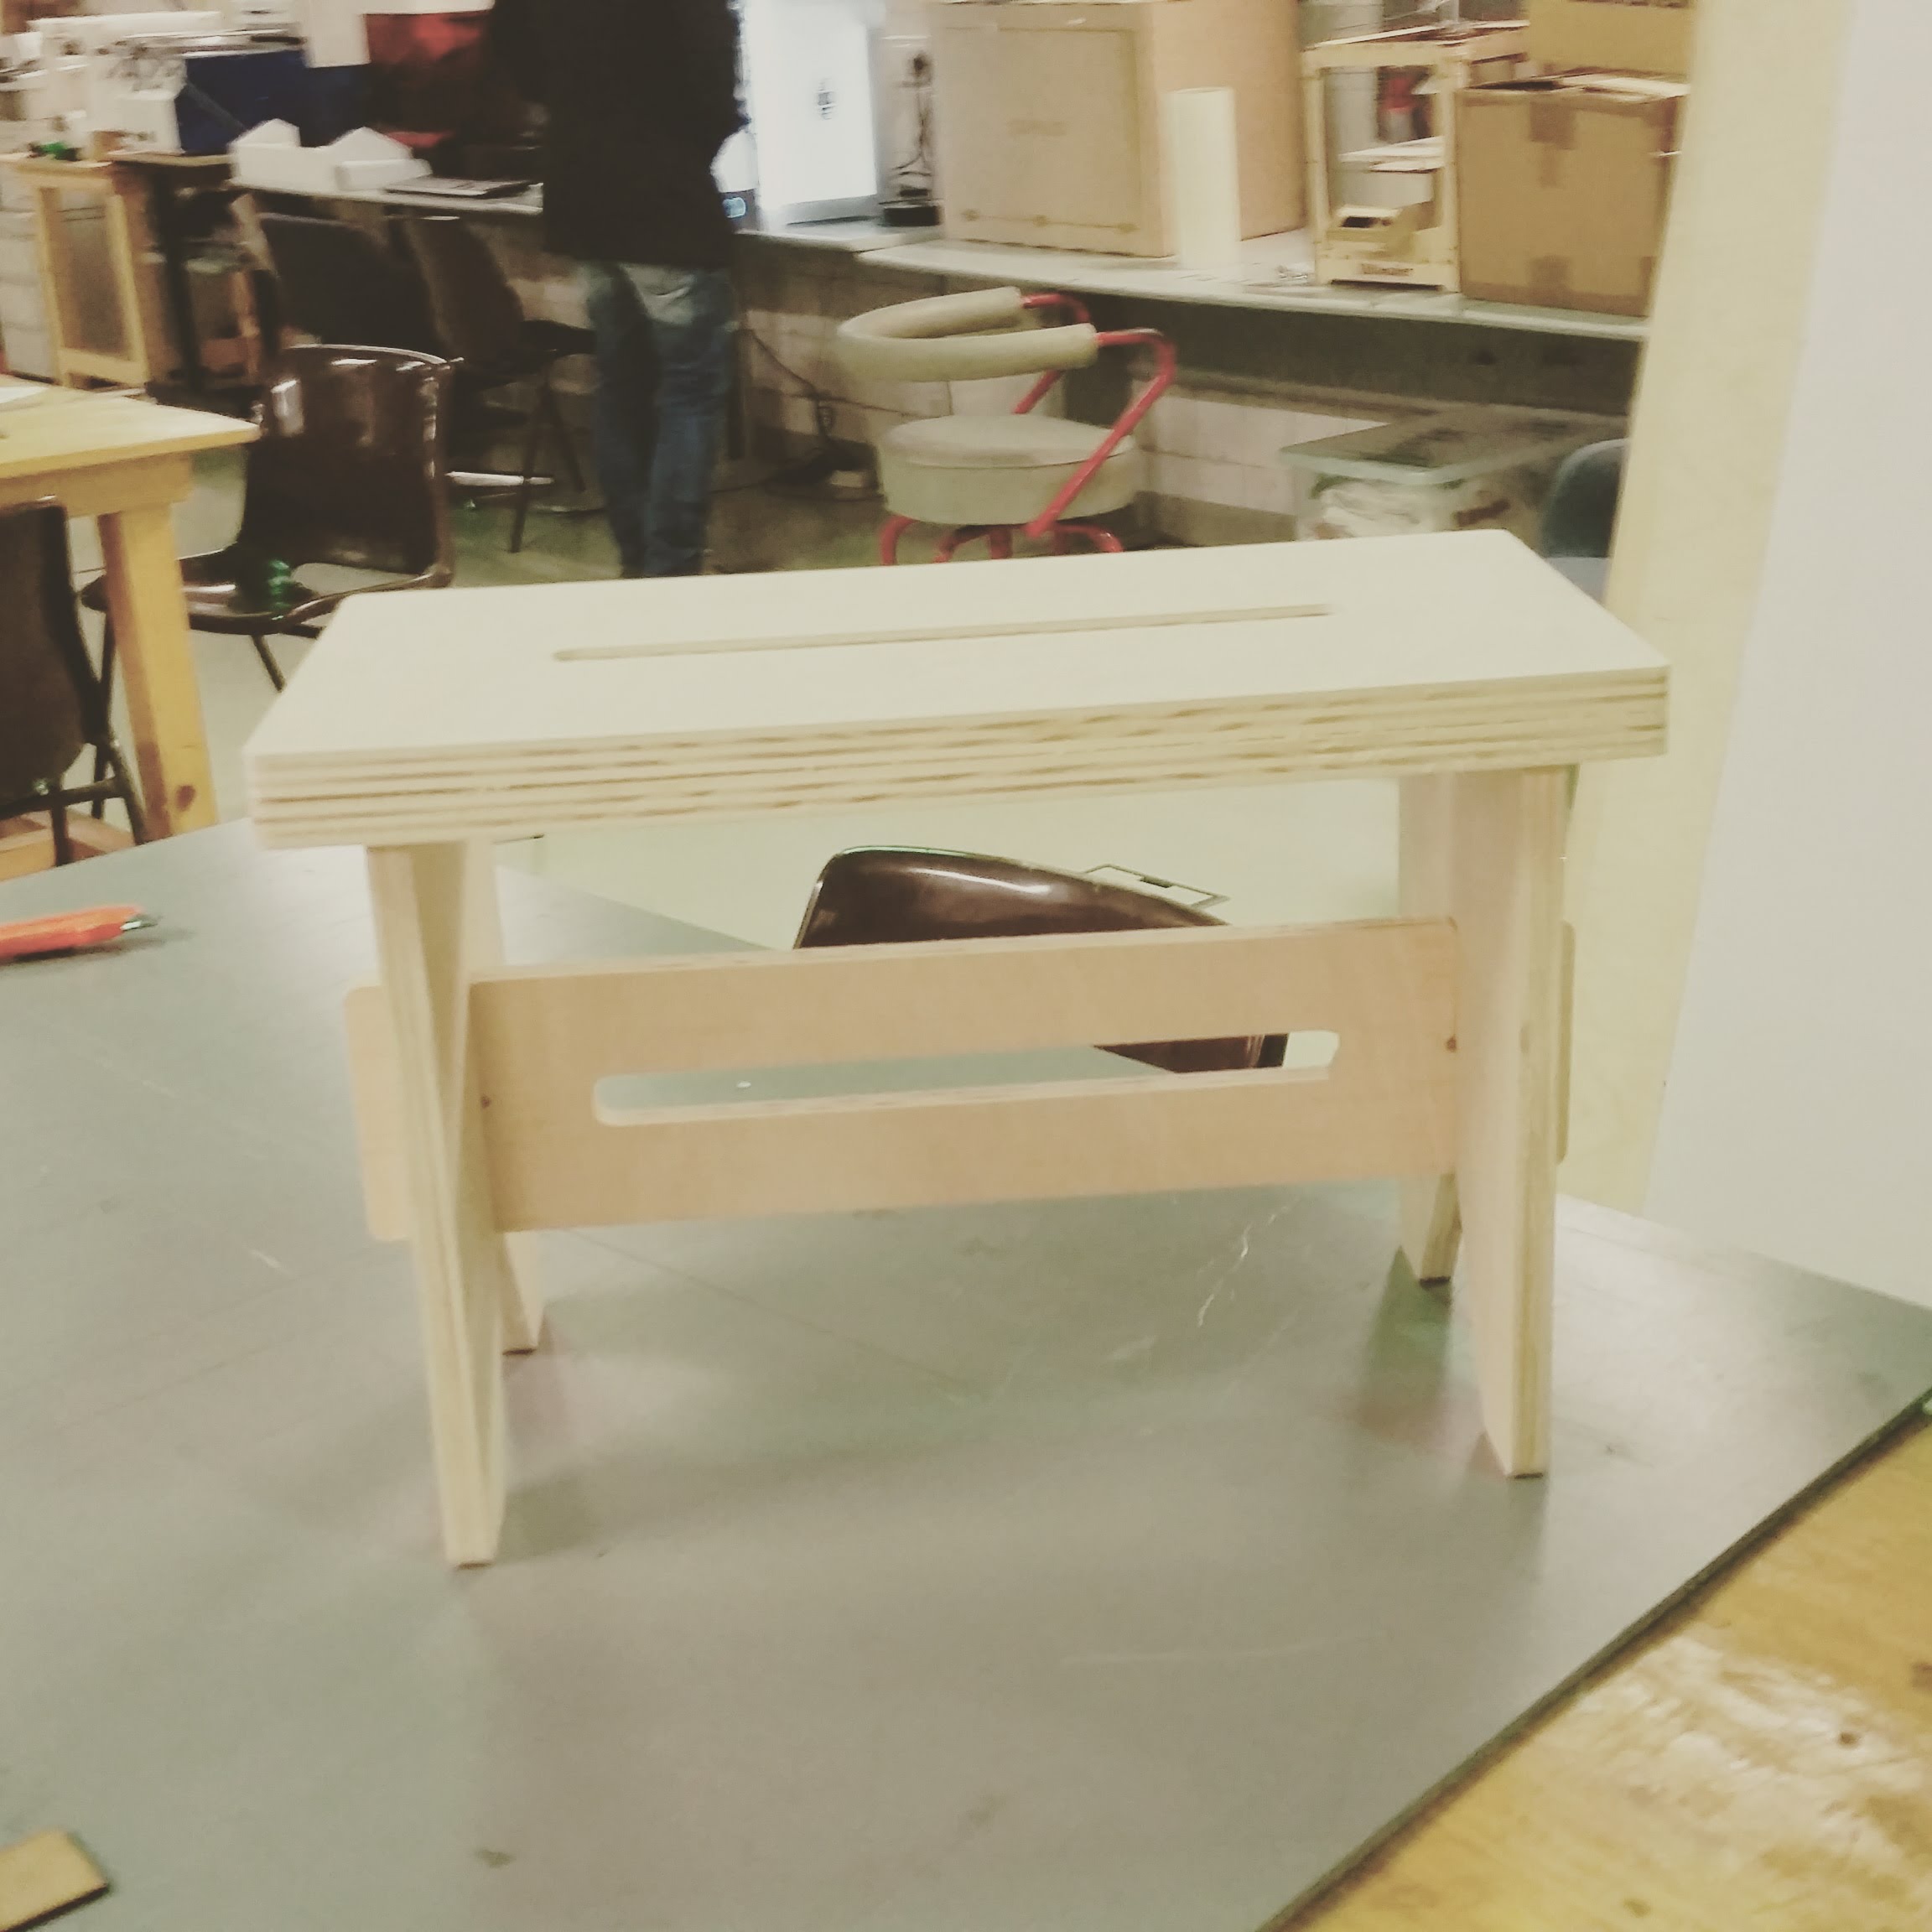 A small plywood bench for the kids